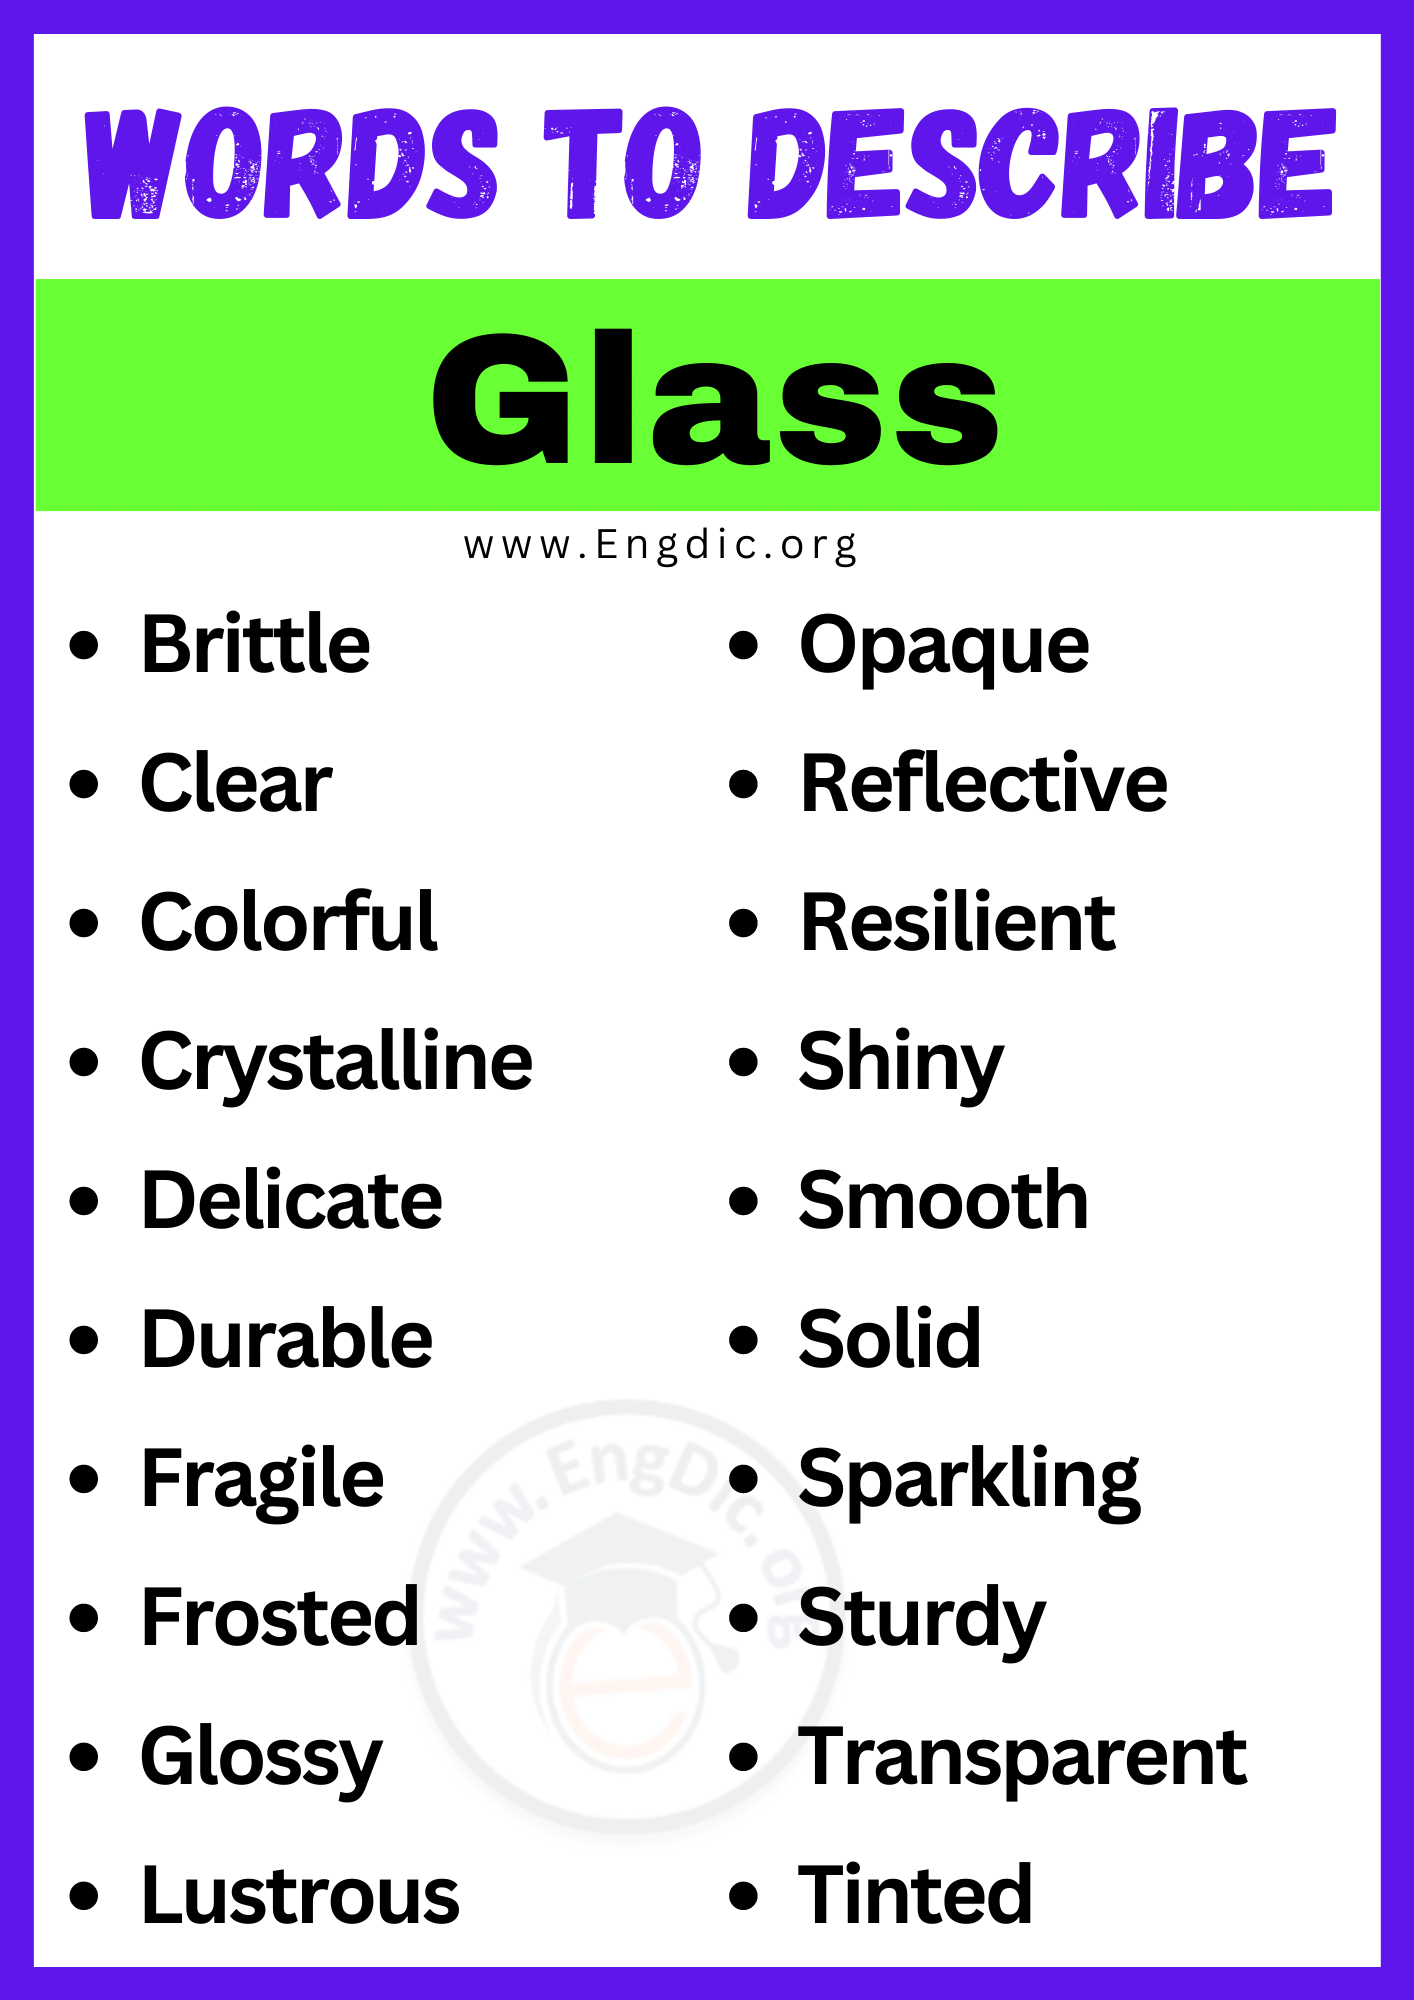 Words to Describe Glass